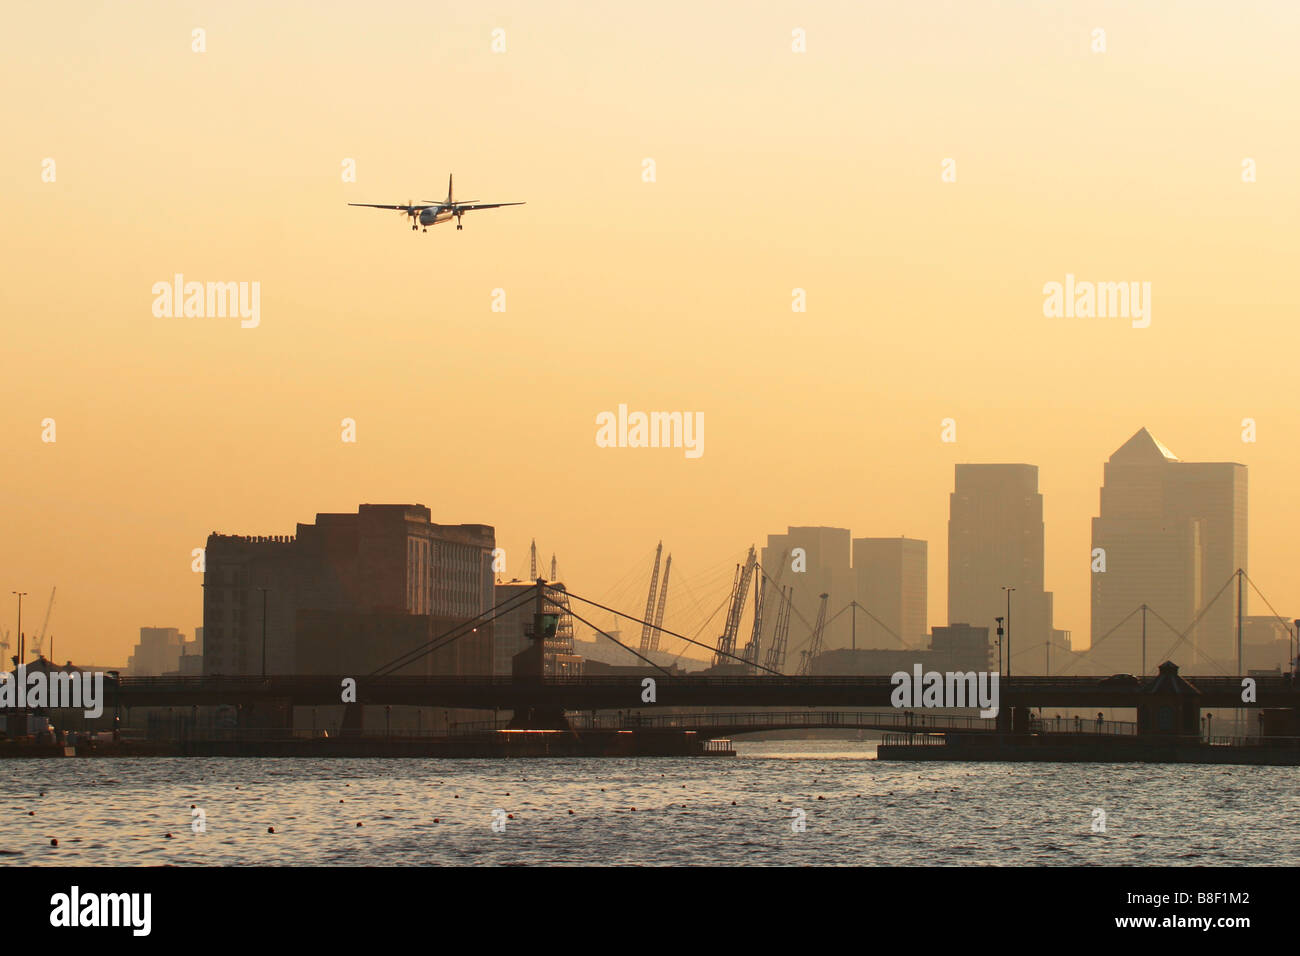 Regional airliner landing at London City Airport with Canary Wharf Docklands in the background, UK Stock Photo